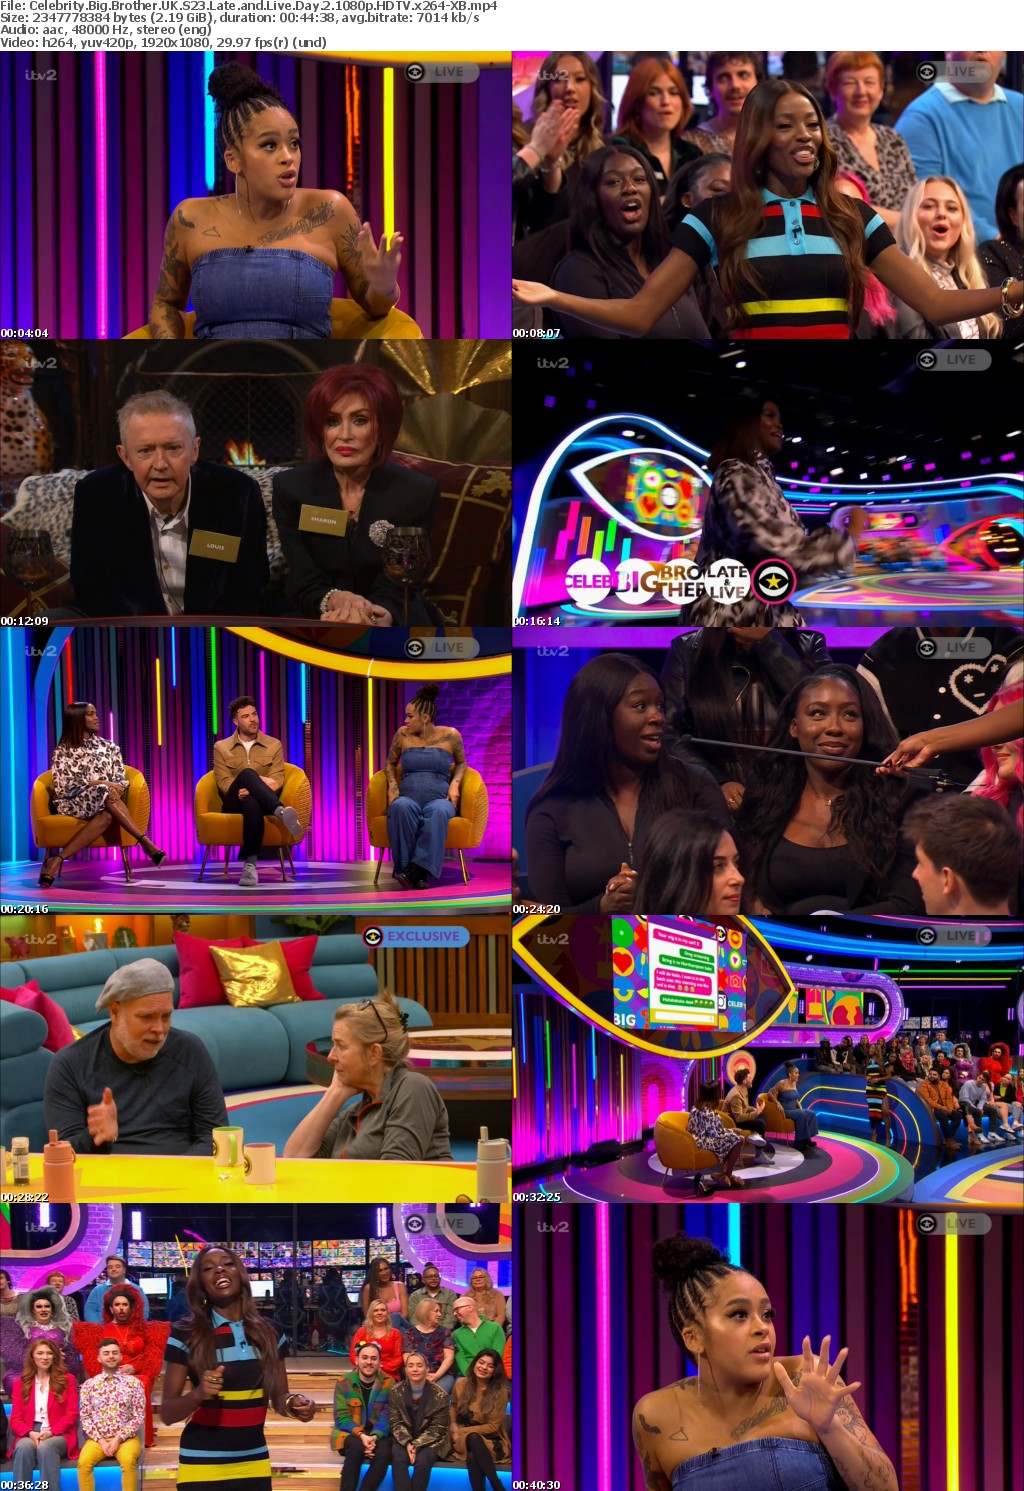 Celebrity Big Brother UK S23 Late and Live Day 2 1080p HDTV x264-XB